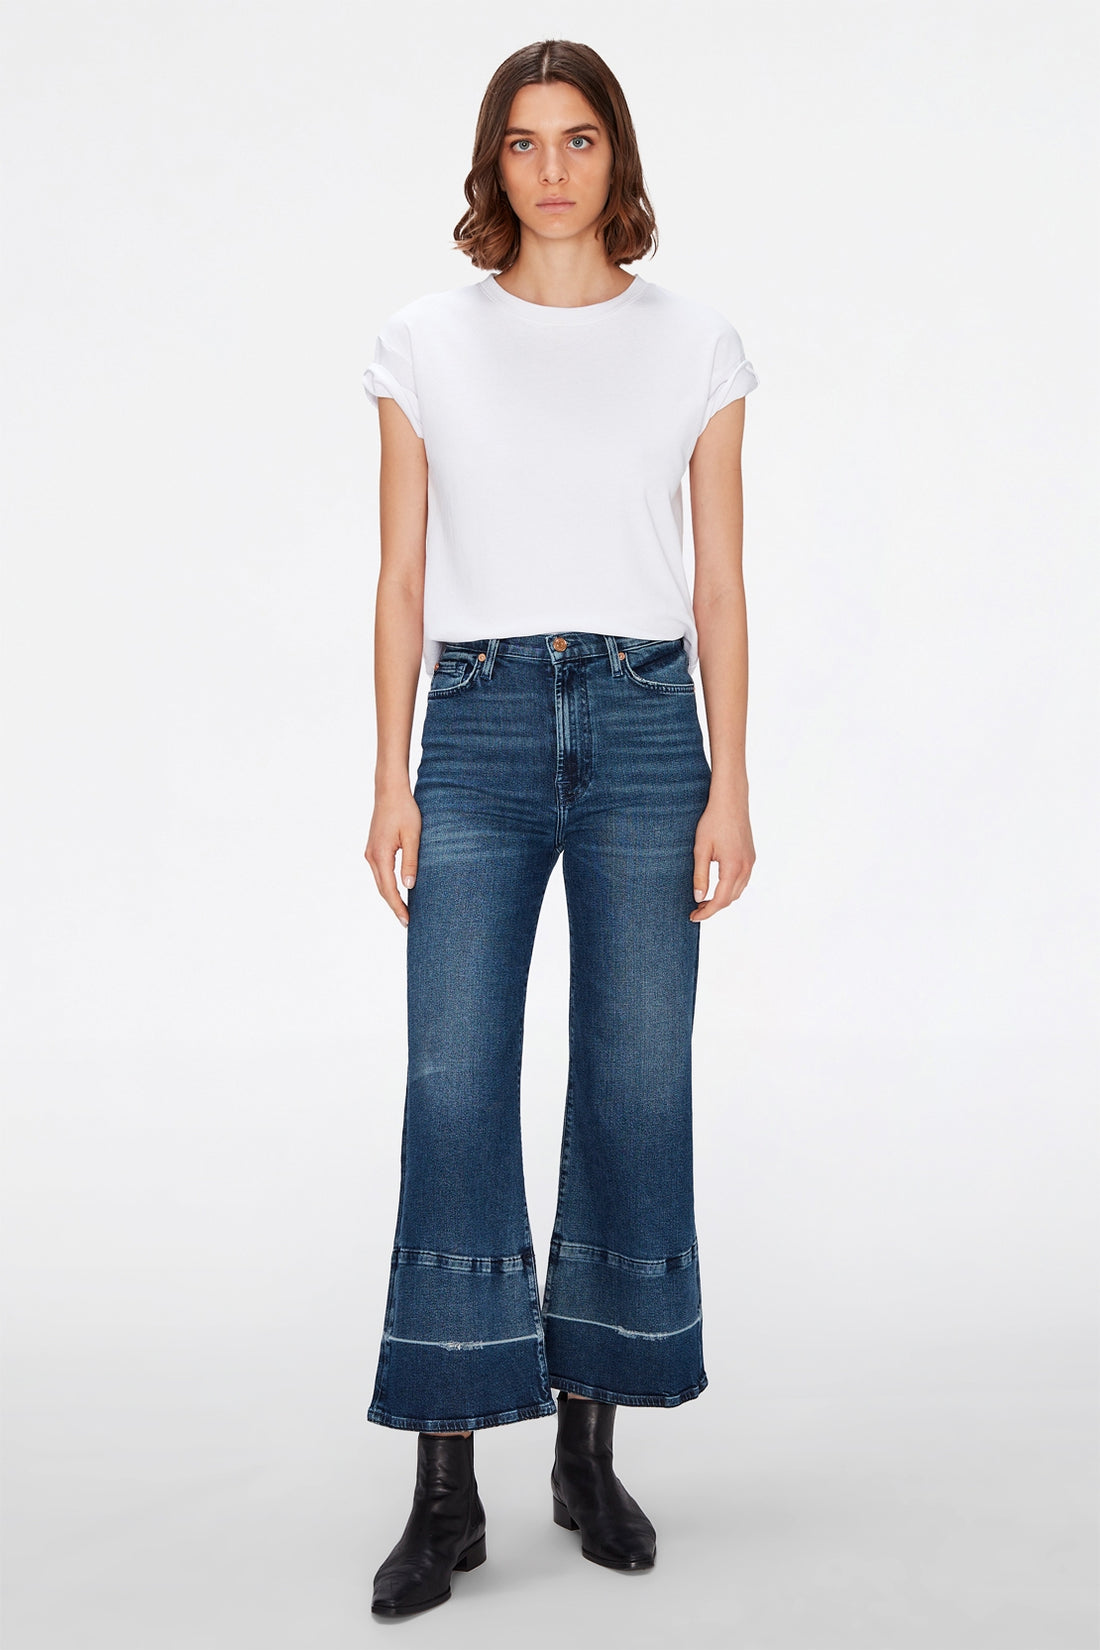 The Cropped Jo Luxe Vintage Spotlight With Let Down Hem